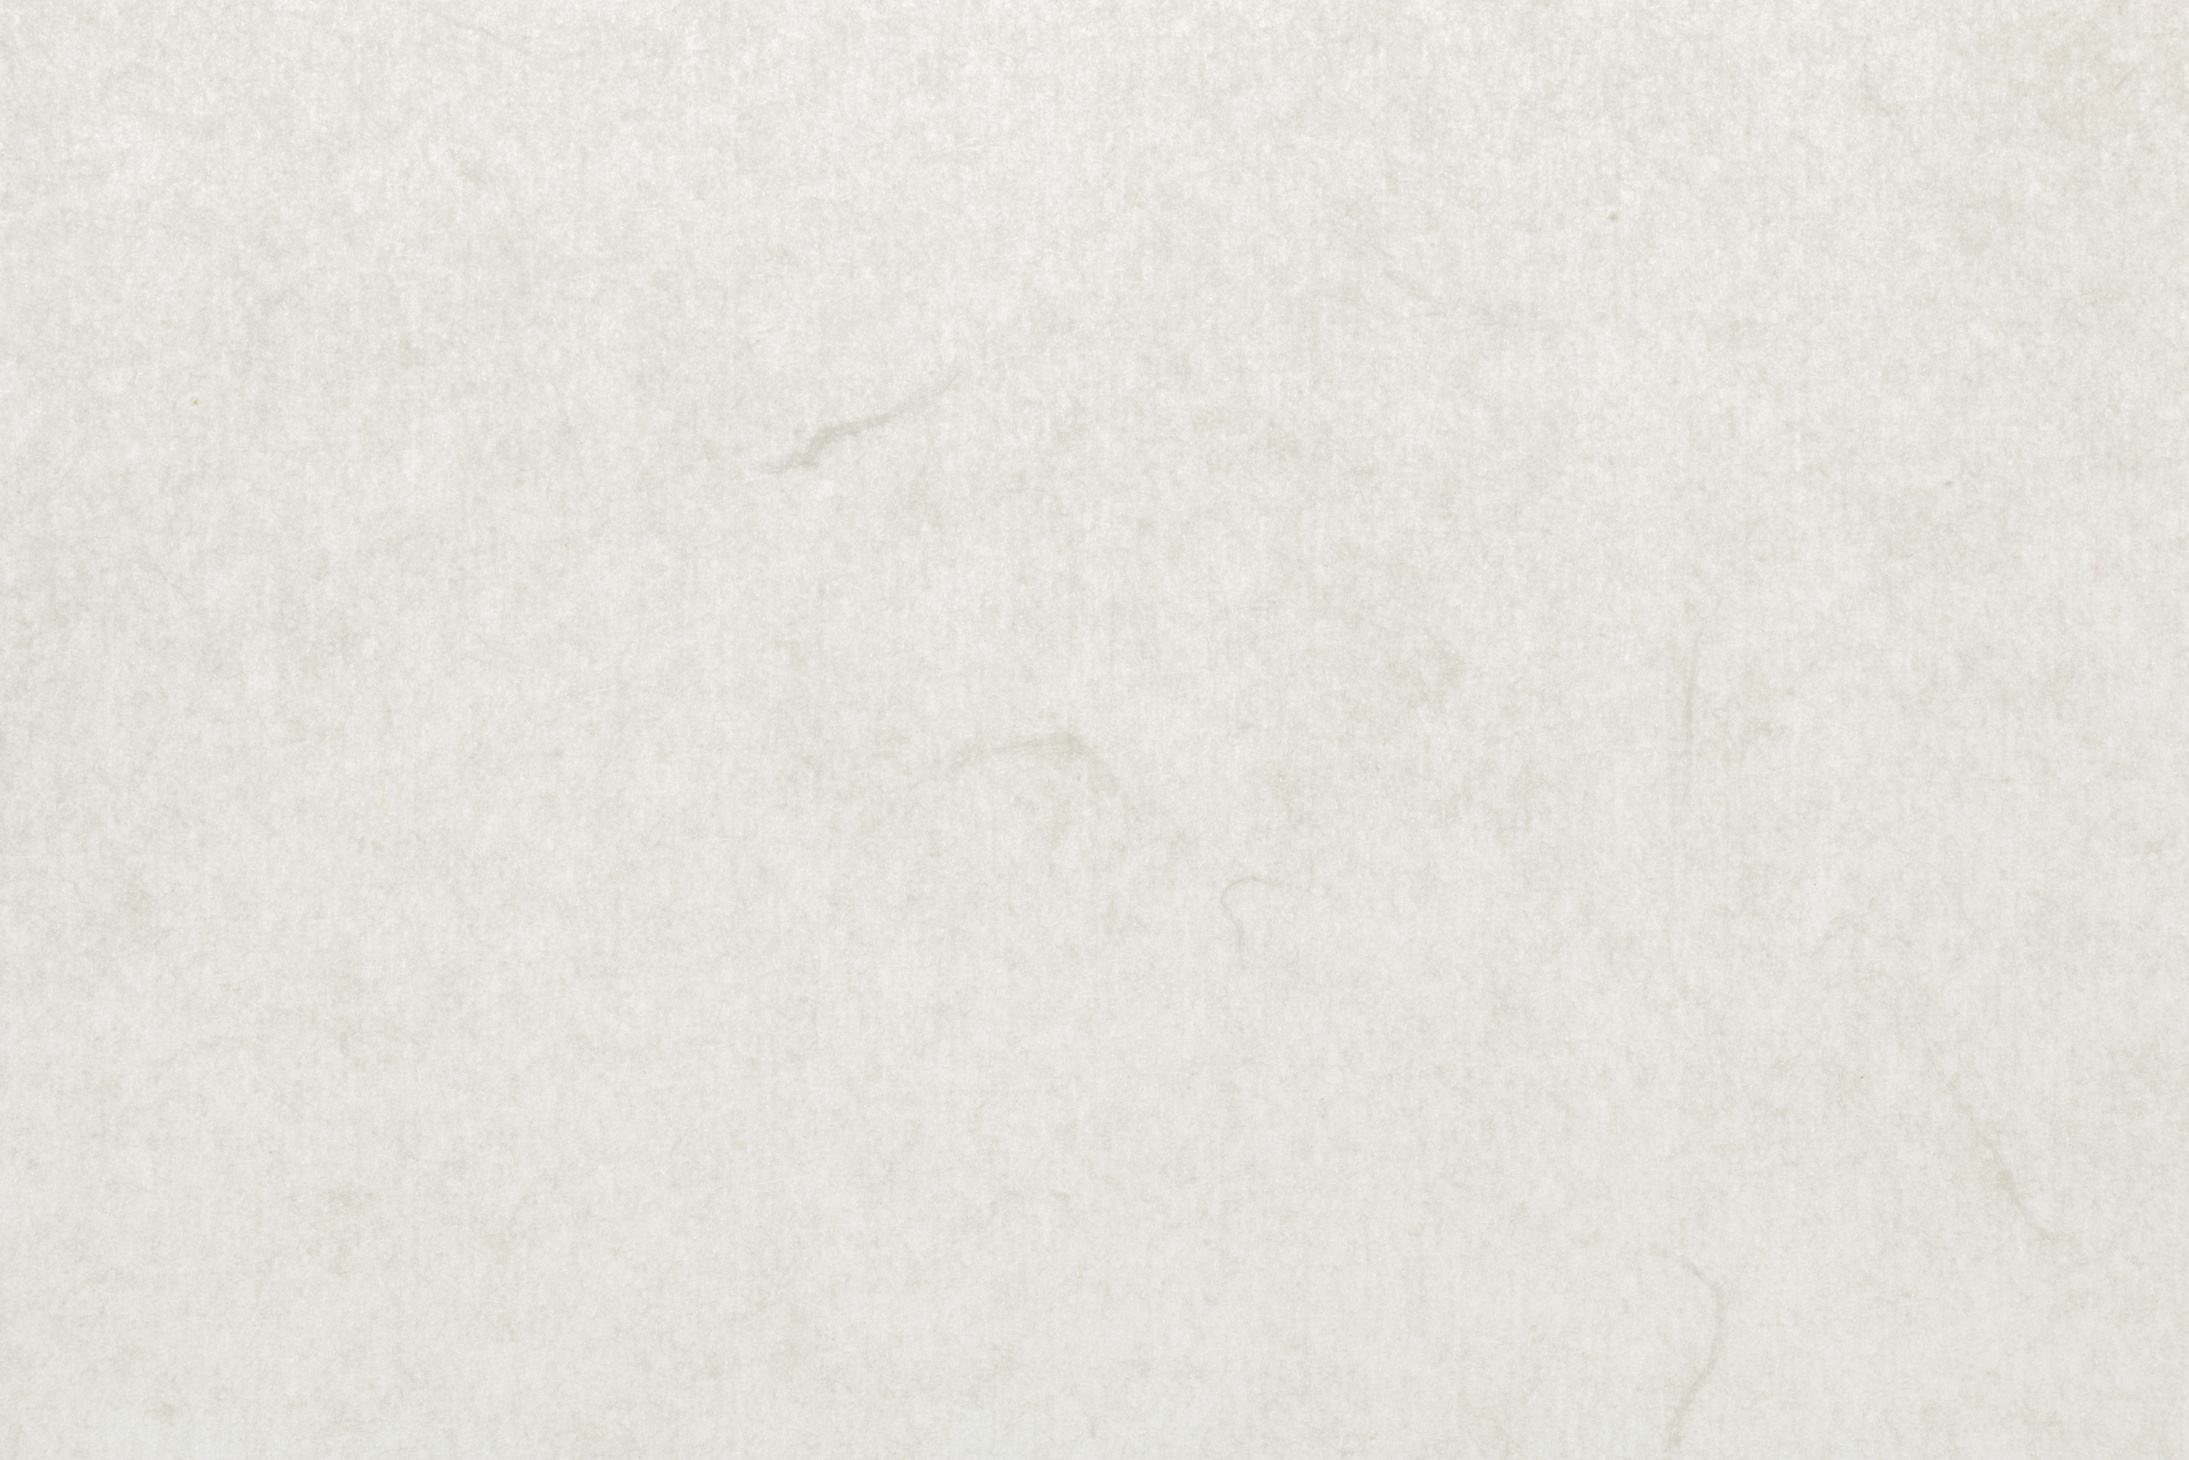 Japanese white vintage paper texture background